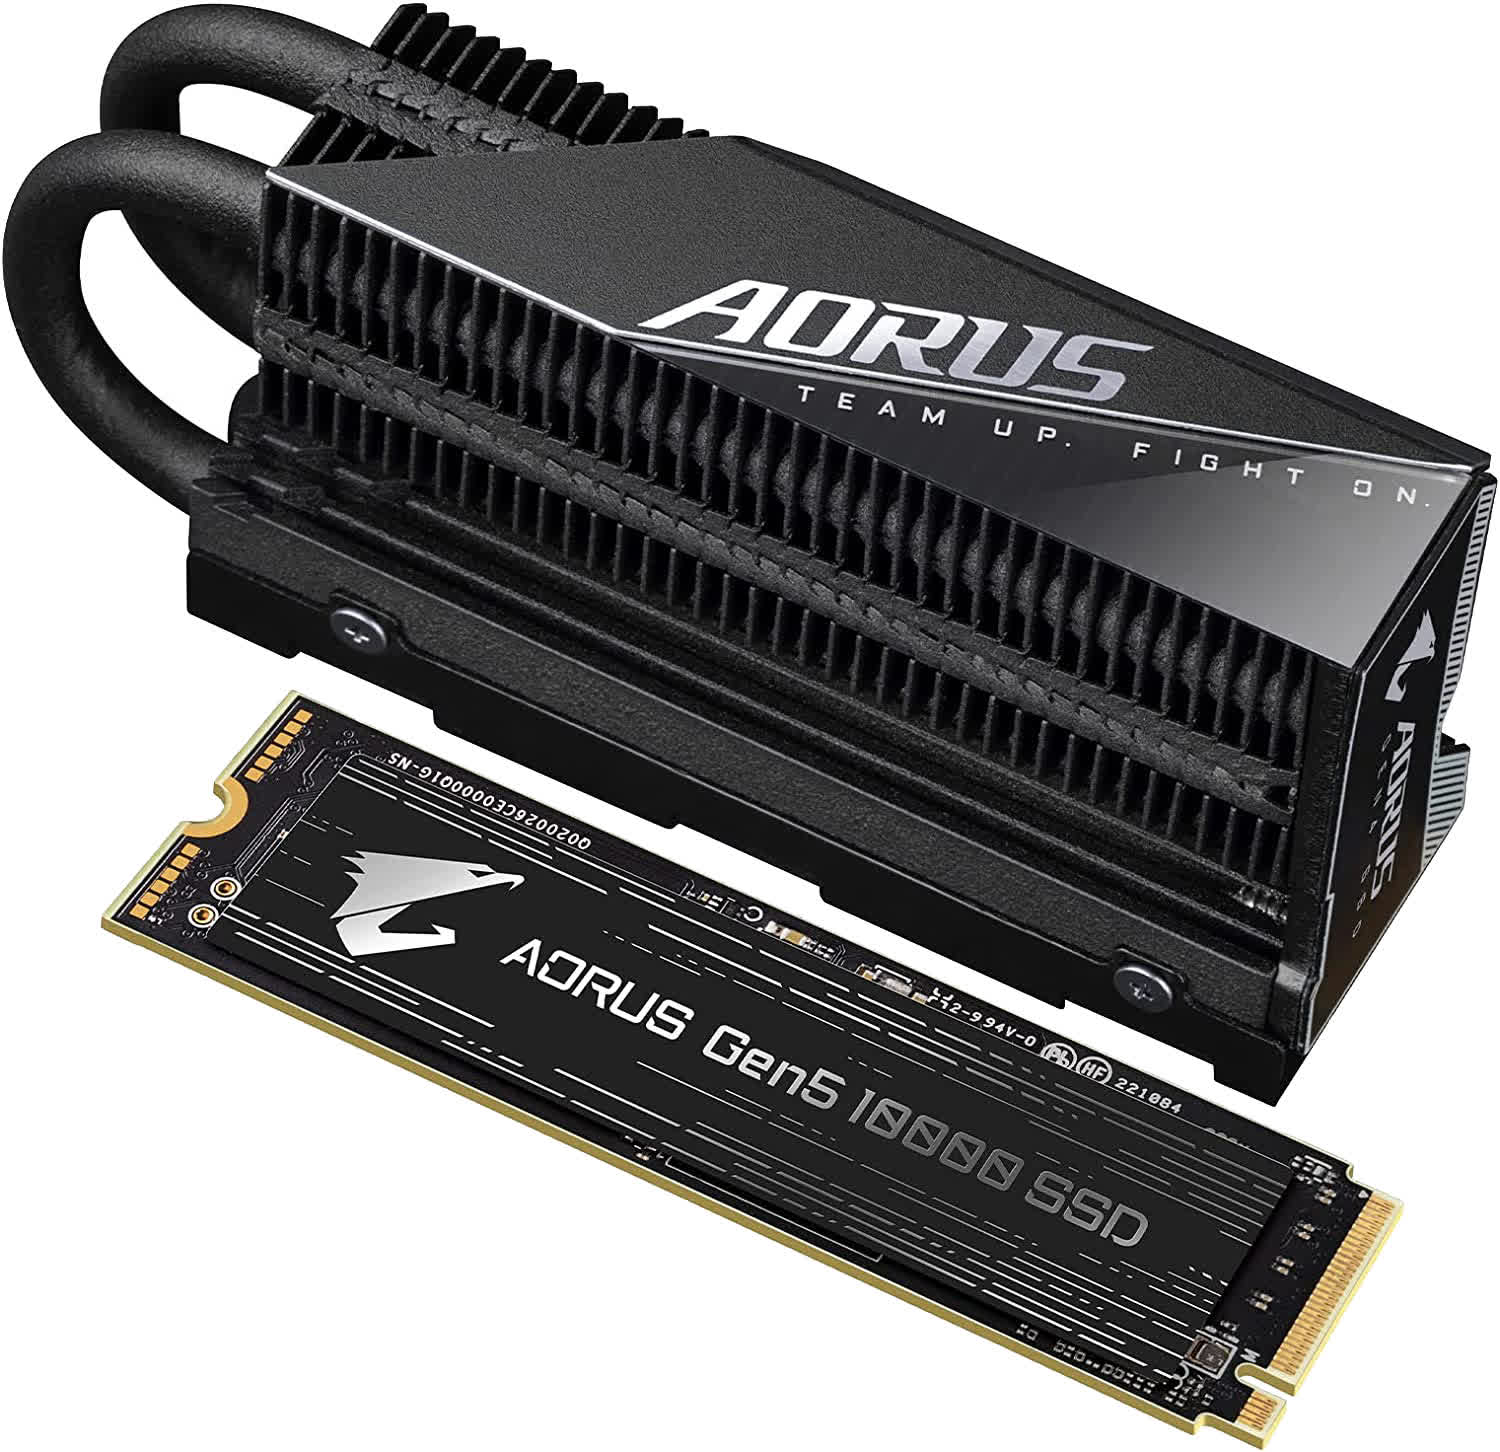 First PCIe 5.0 SSDs touch down with blazing speeds, big heatsinks, and high prices